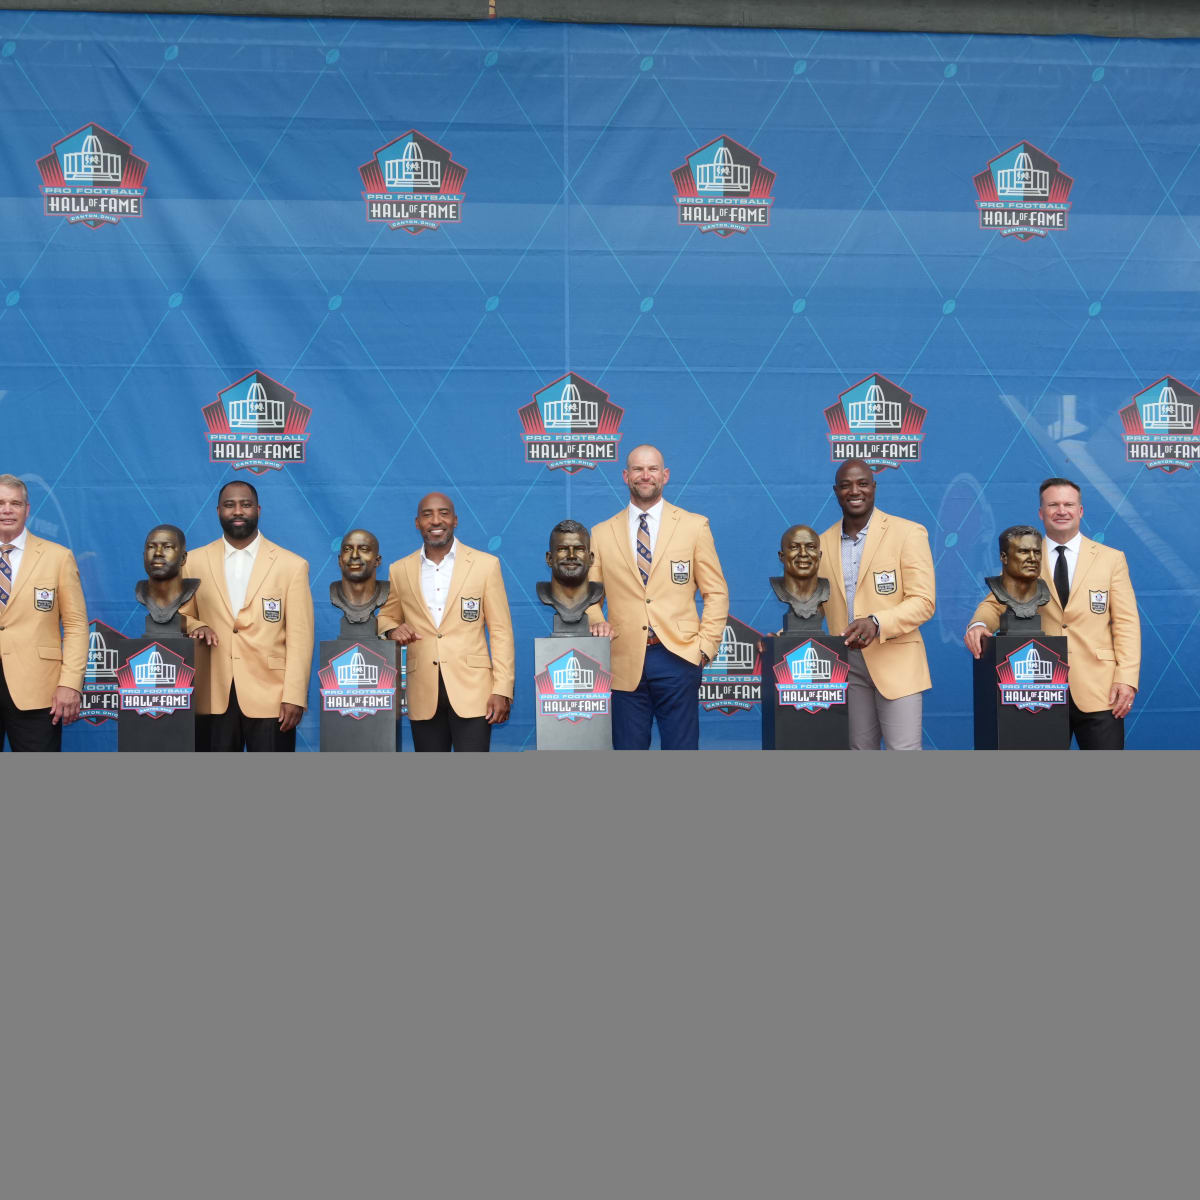 2023 Pro Football Hall of Fame: Four Standout Moments From the